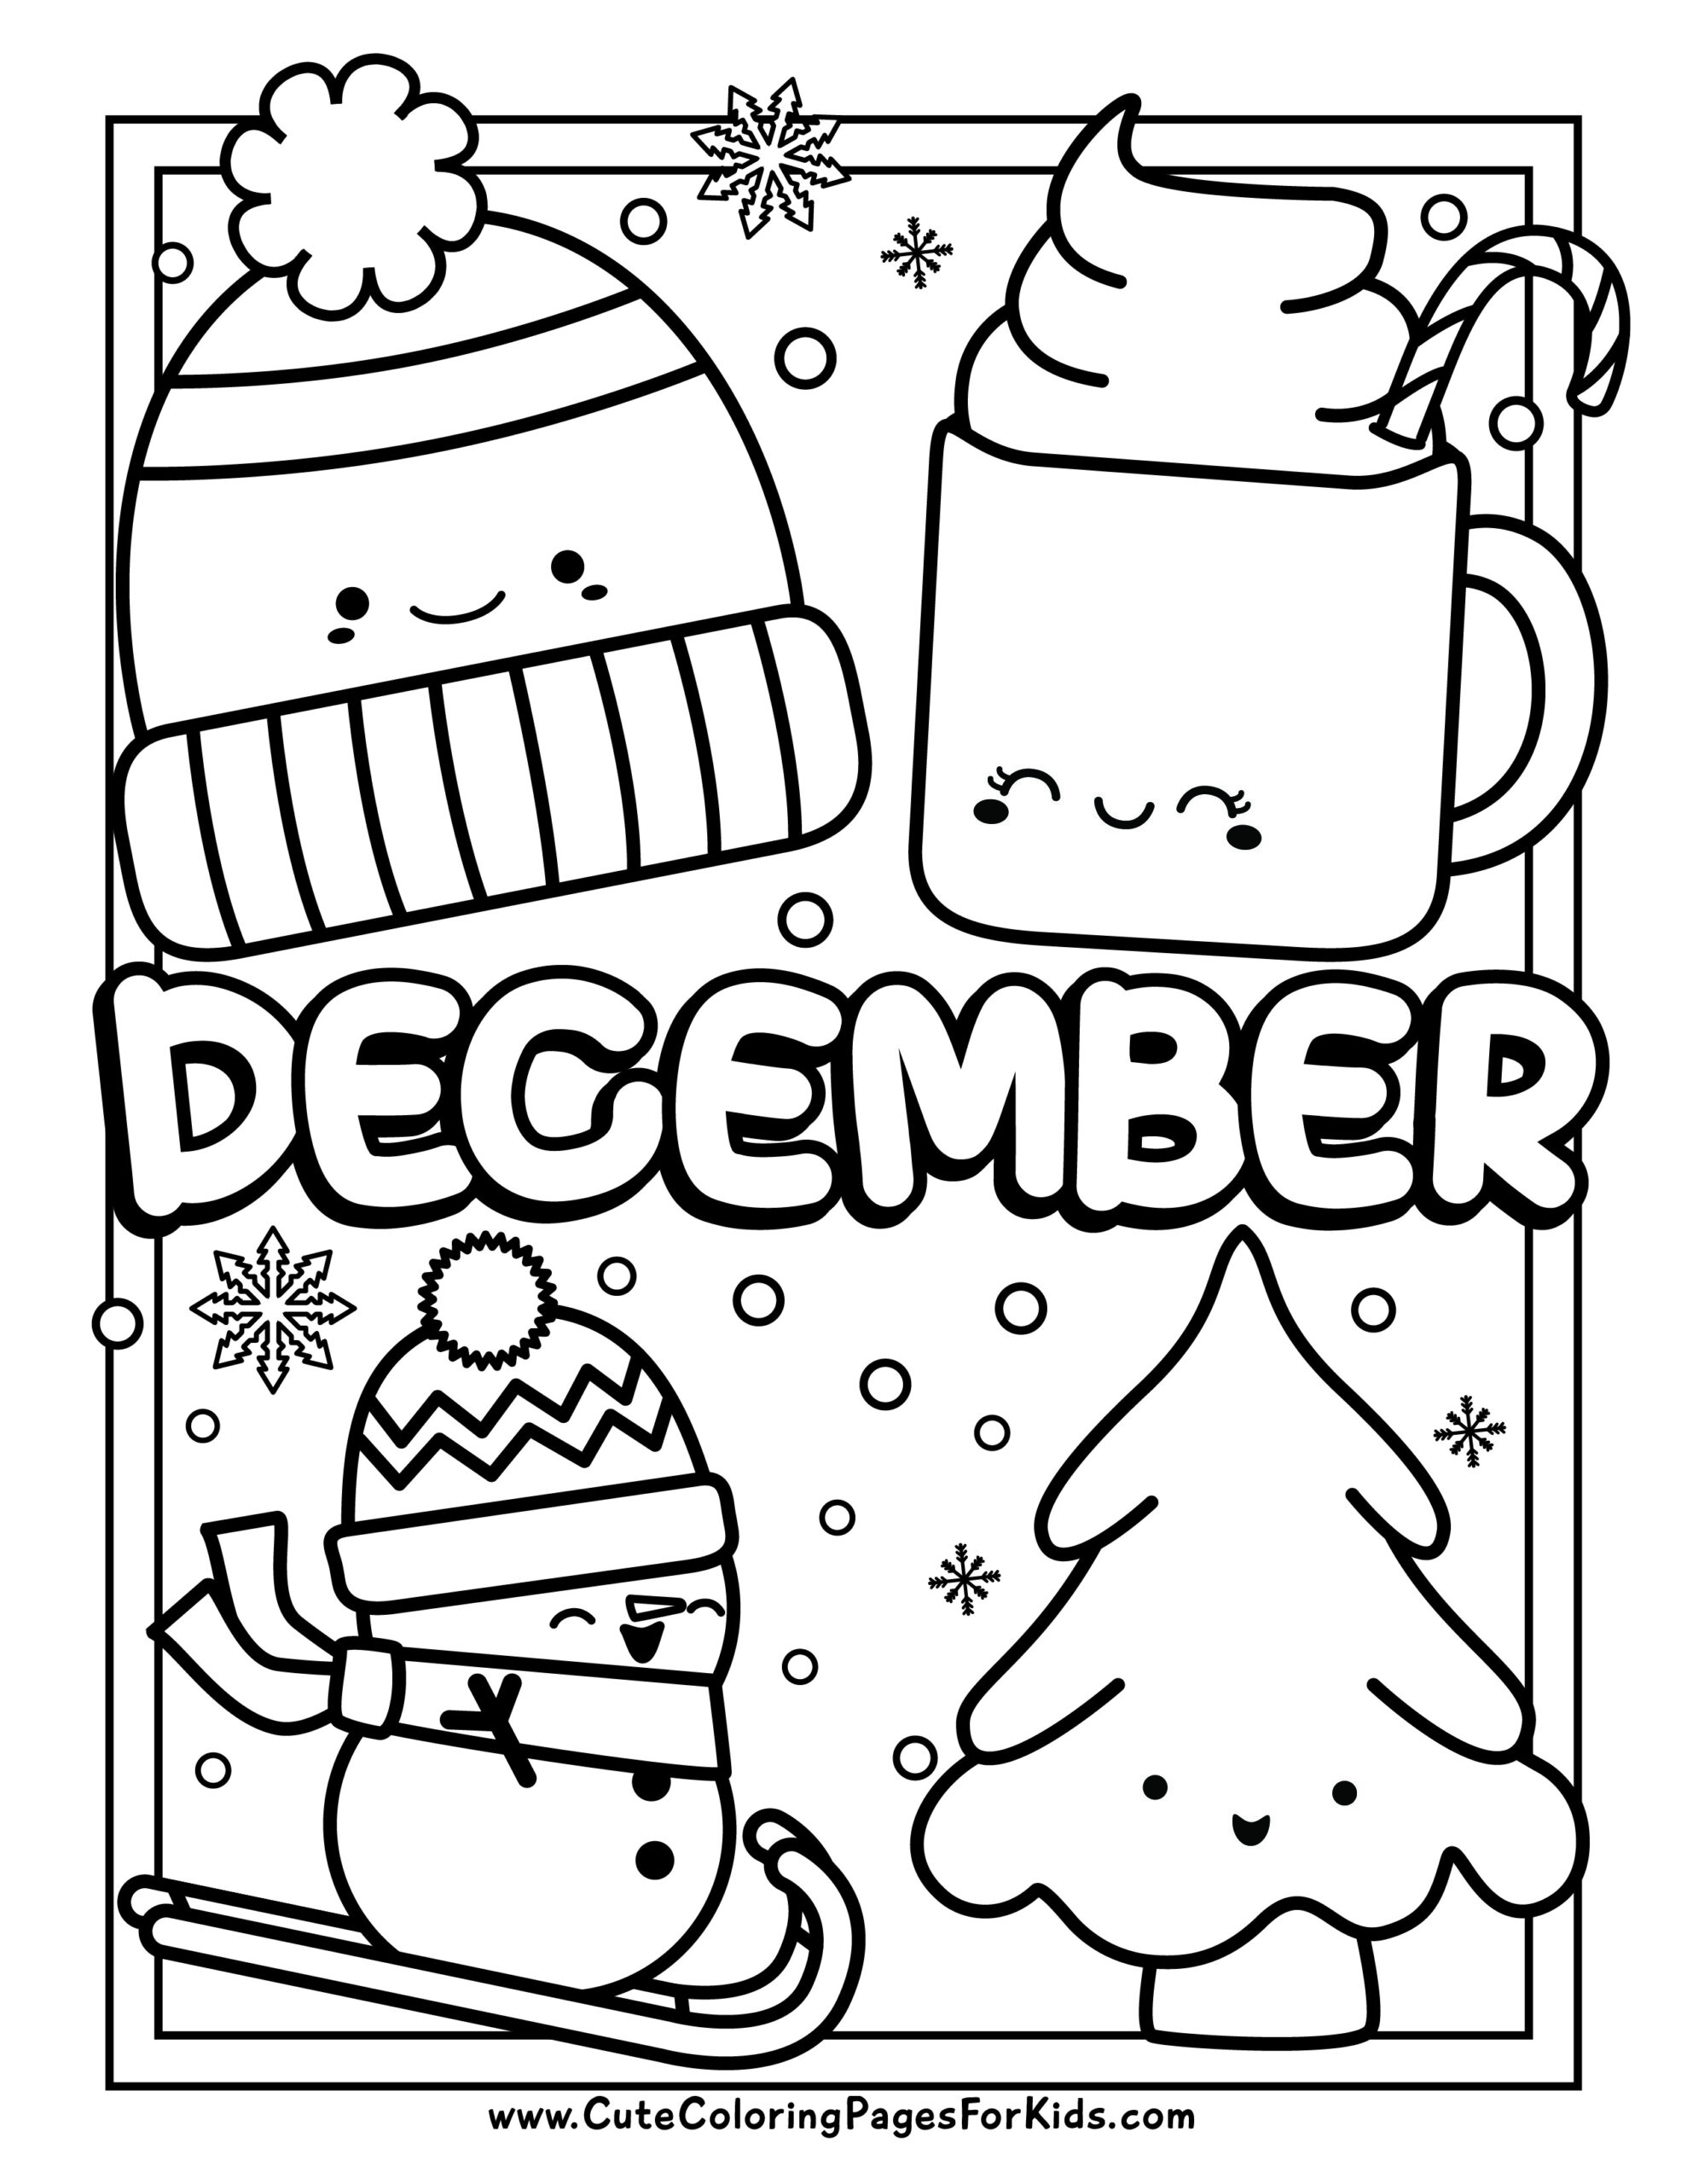 Free Printable Cartoon Coloring Pages for Kids